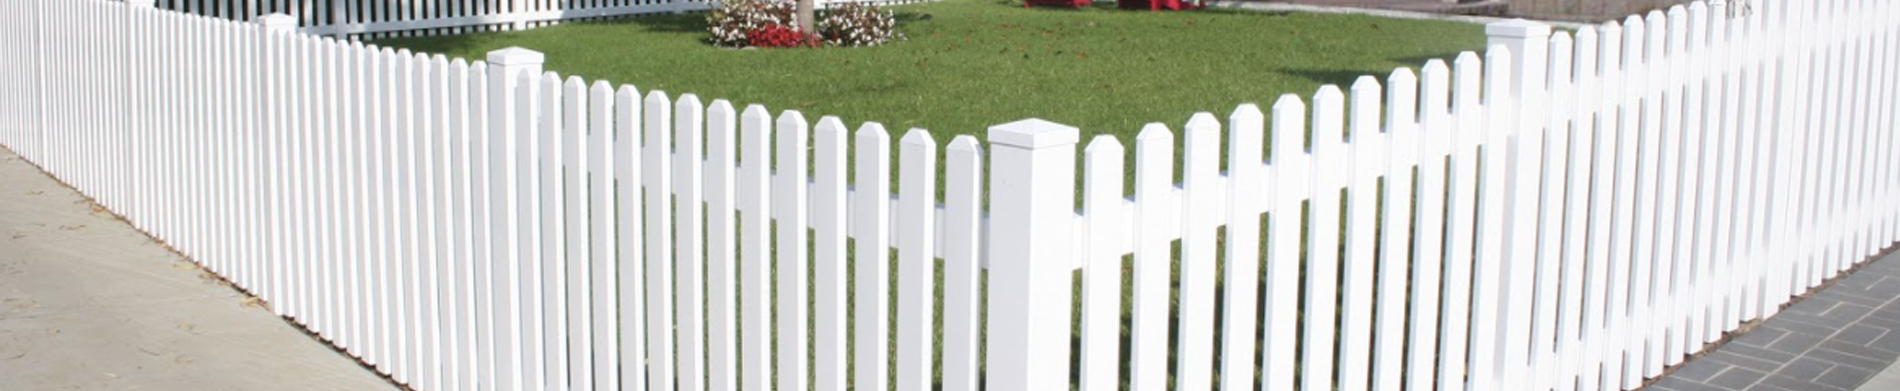 The popularity of vinyl fences in the USA – Install yours soon